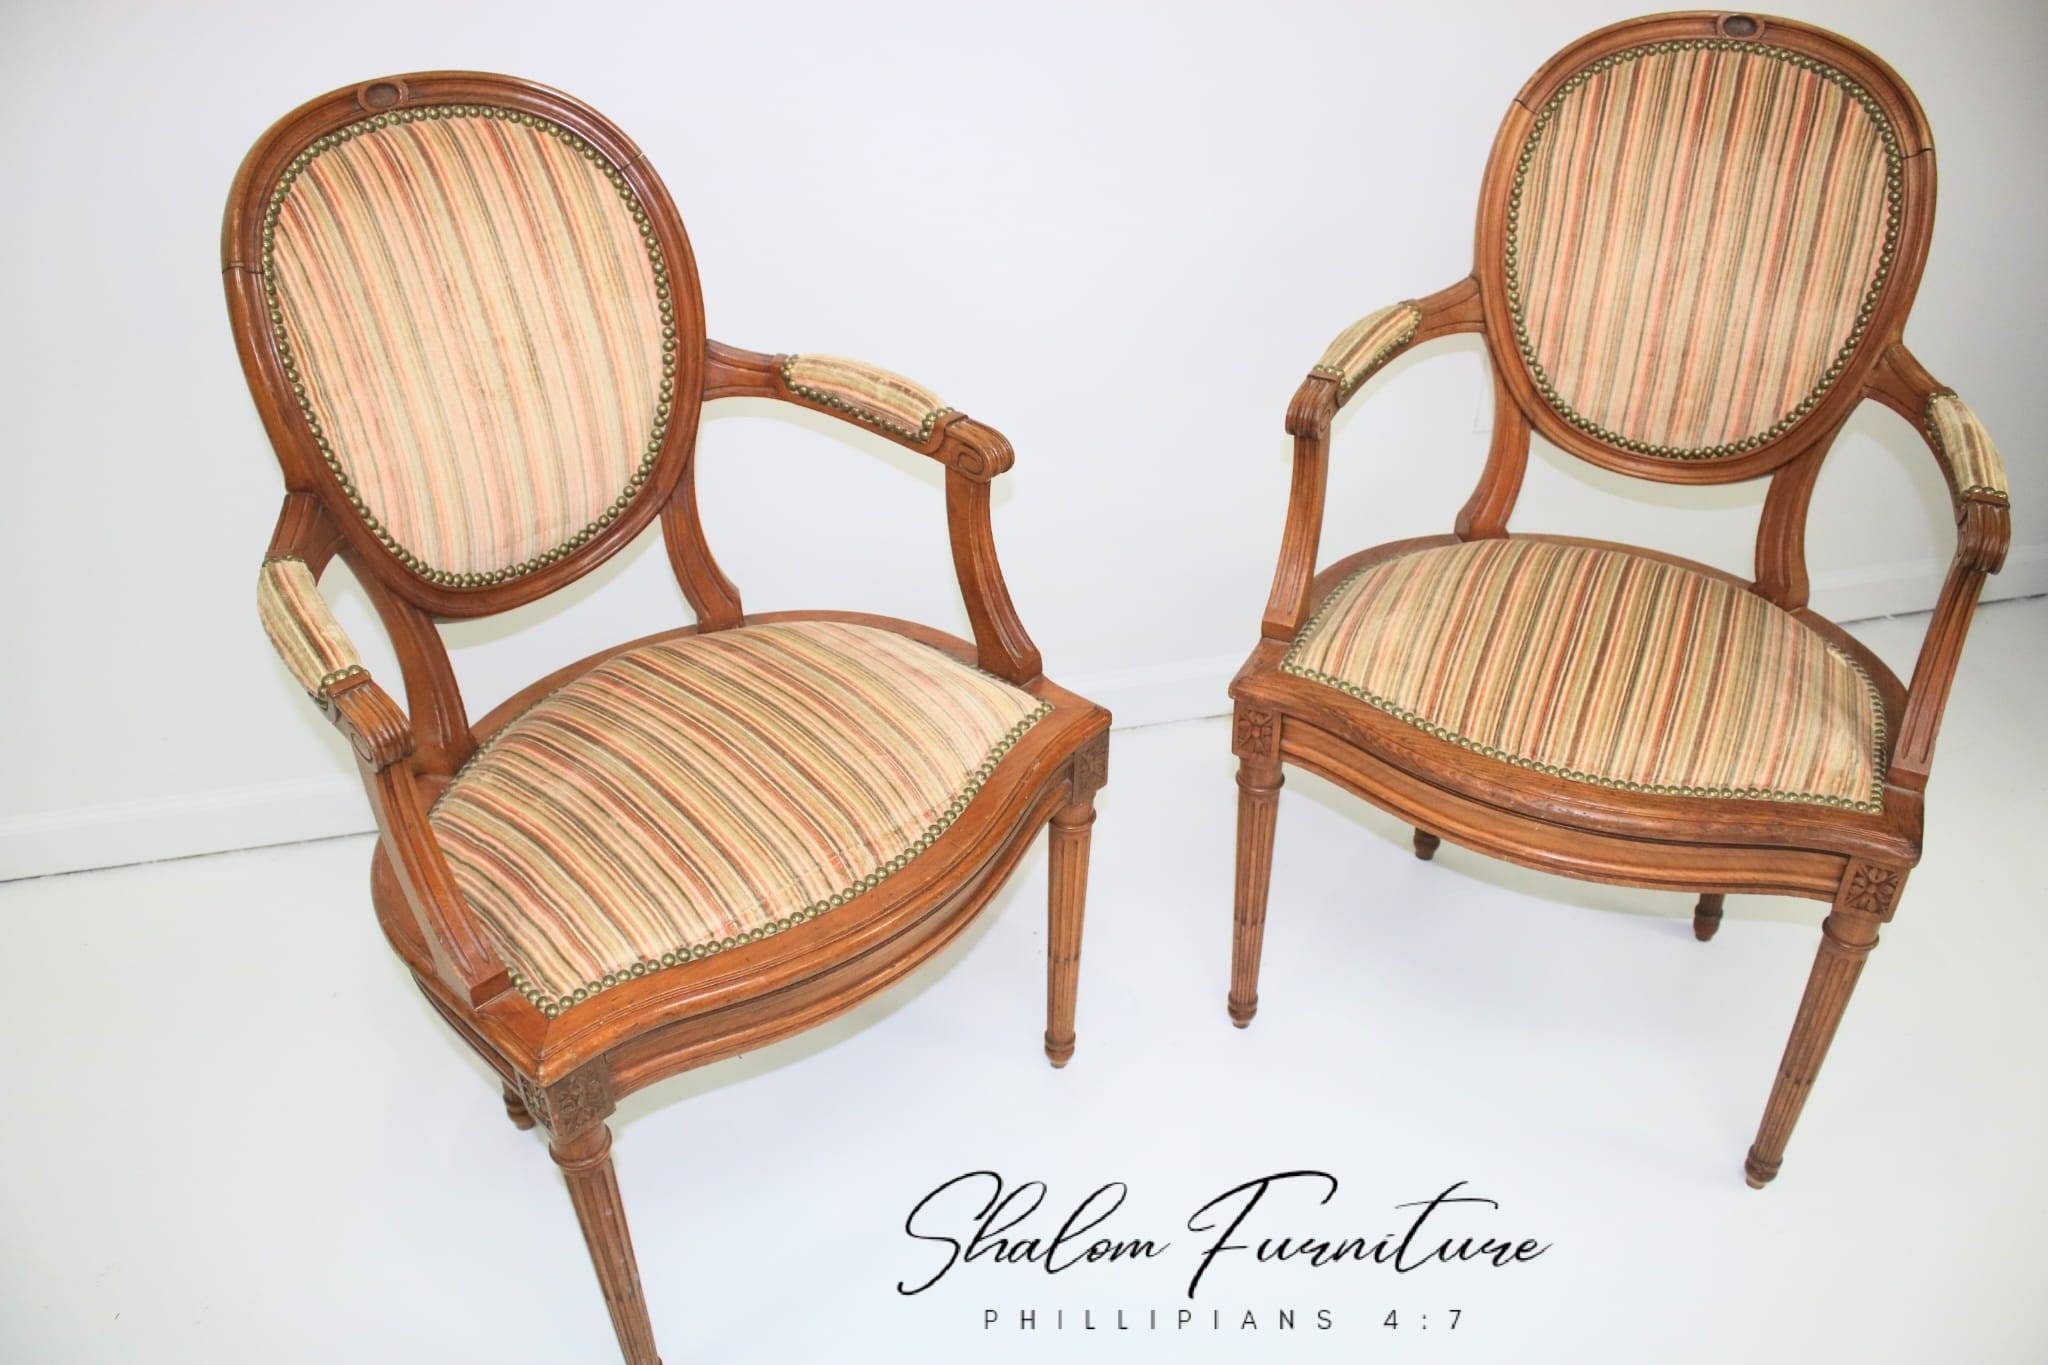 19th century French Antique Chairs (sold as pair) - Cayen Home